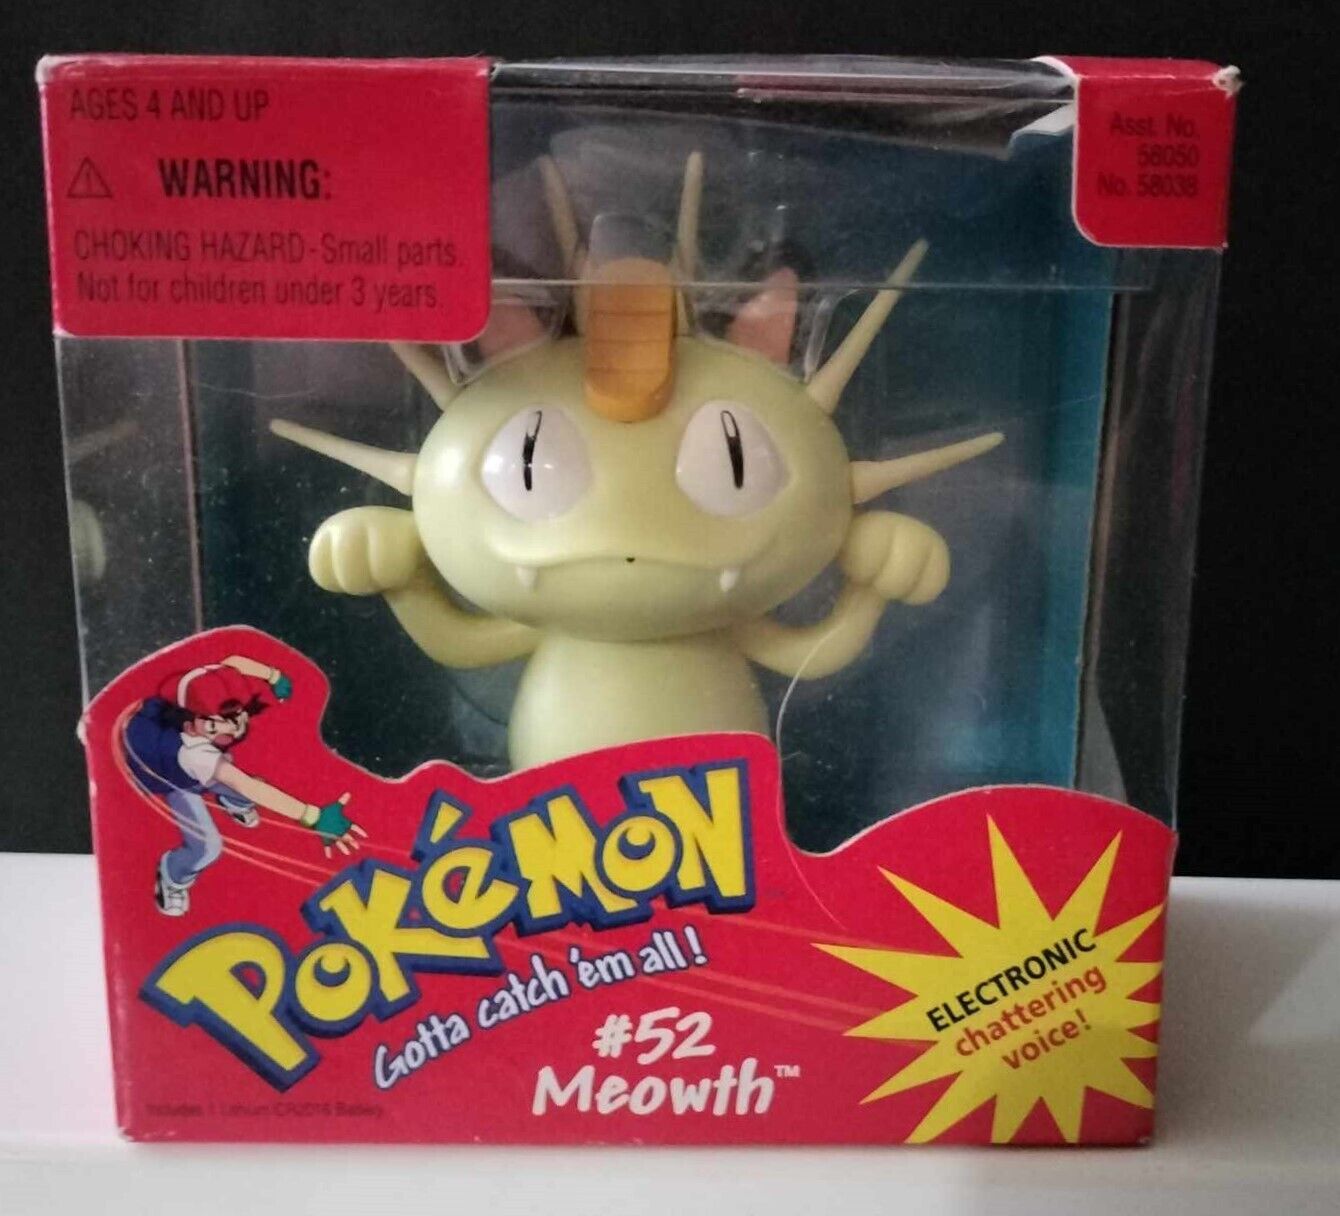 VINTAGE /Pokemon Meowth #52 /Electronic Chattering Voice/ New Old Stock/1998